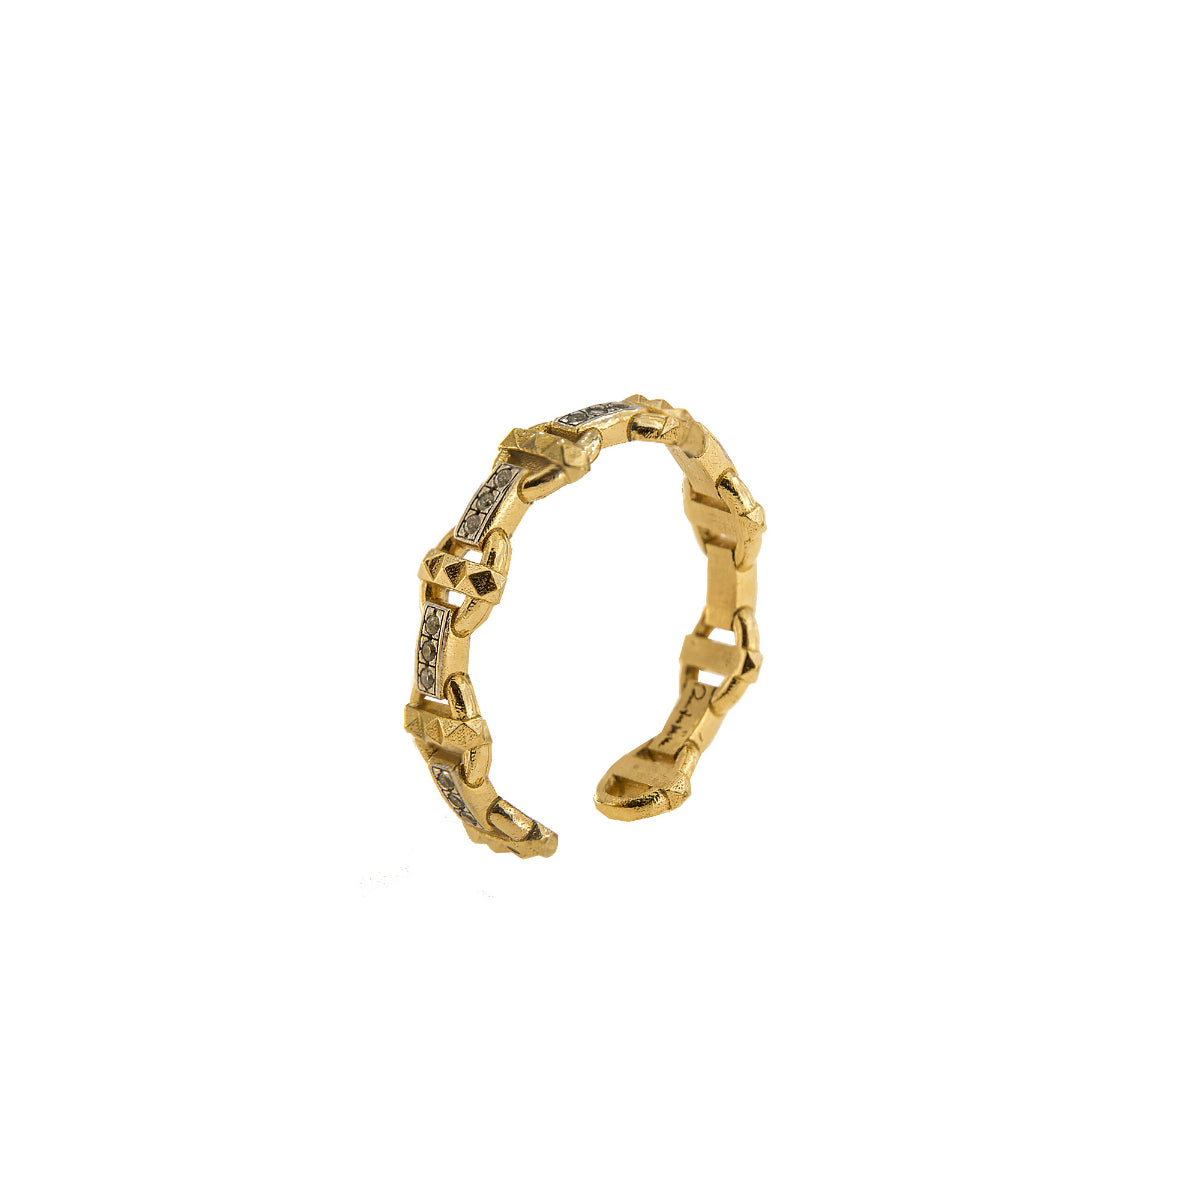 Rings - Ring with marine links and studs - 1 | Rue des Mille